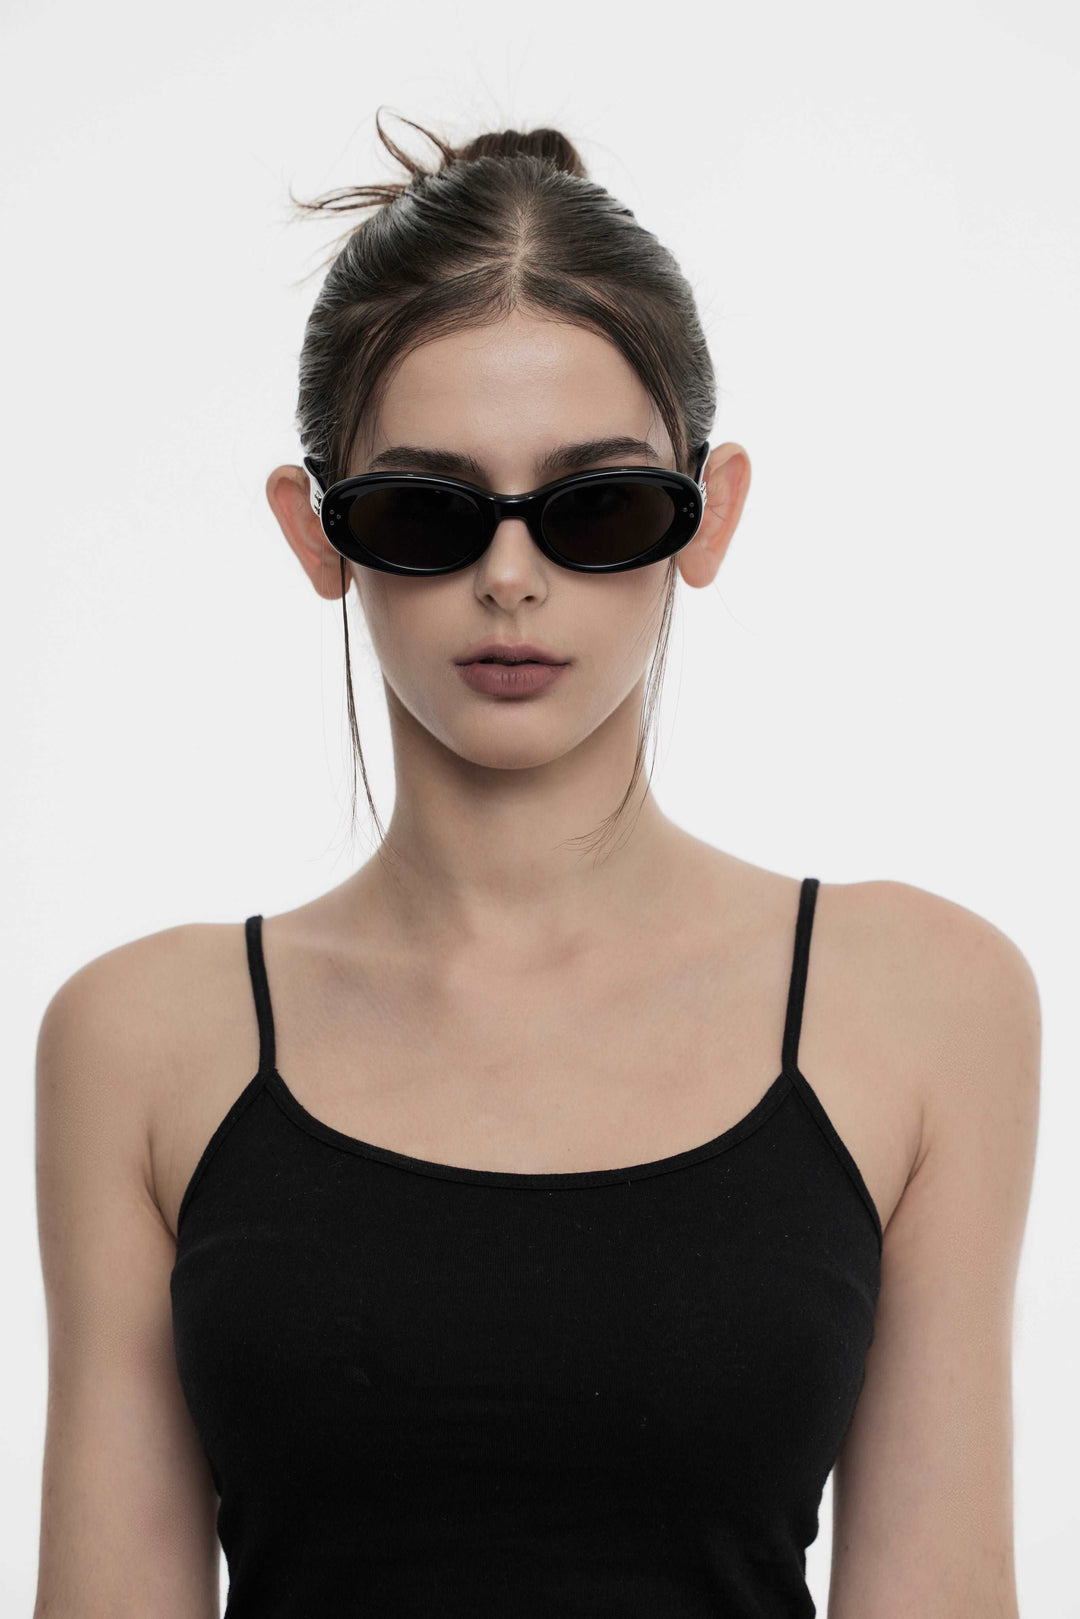 Female Model of her front face wearing Breath in black High-quality round sunglasses from Mercury Retrograde Burr Puzzle Collection 